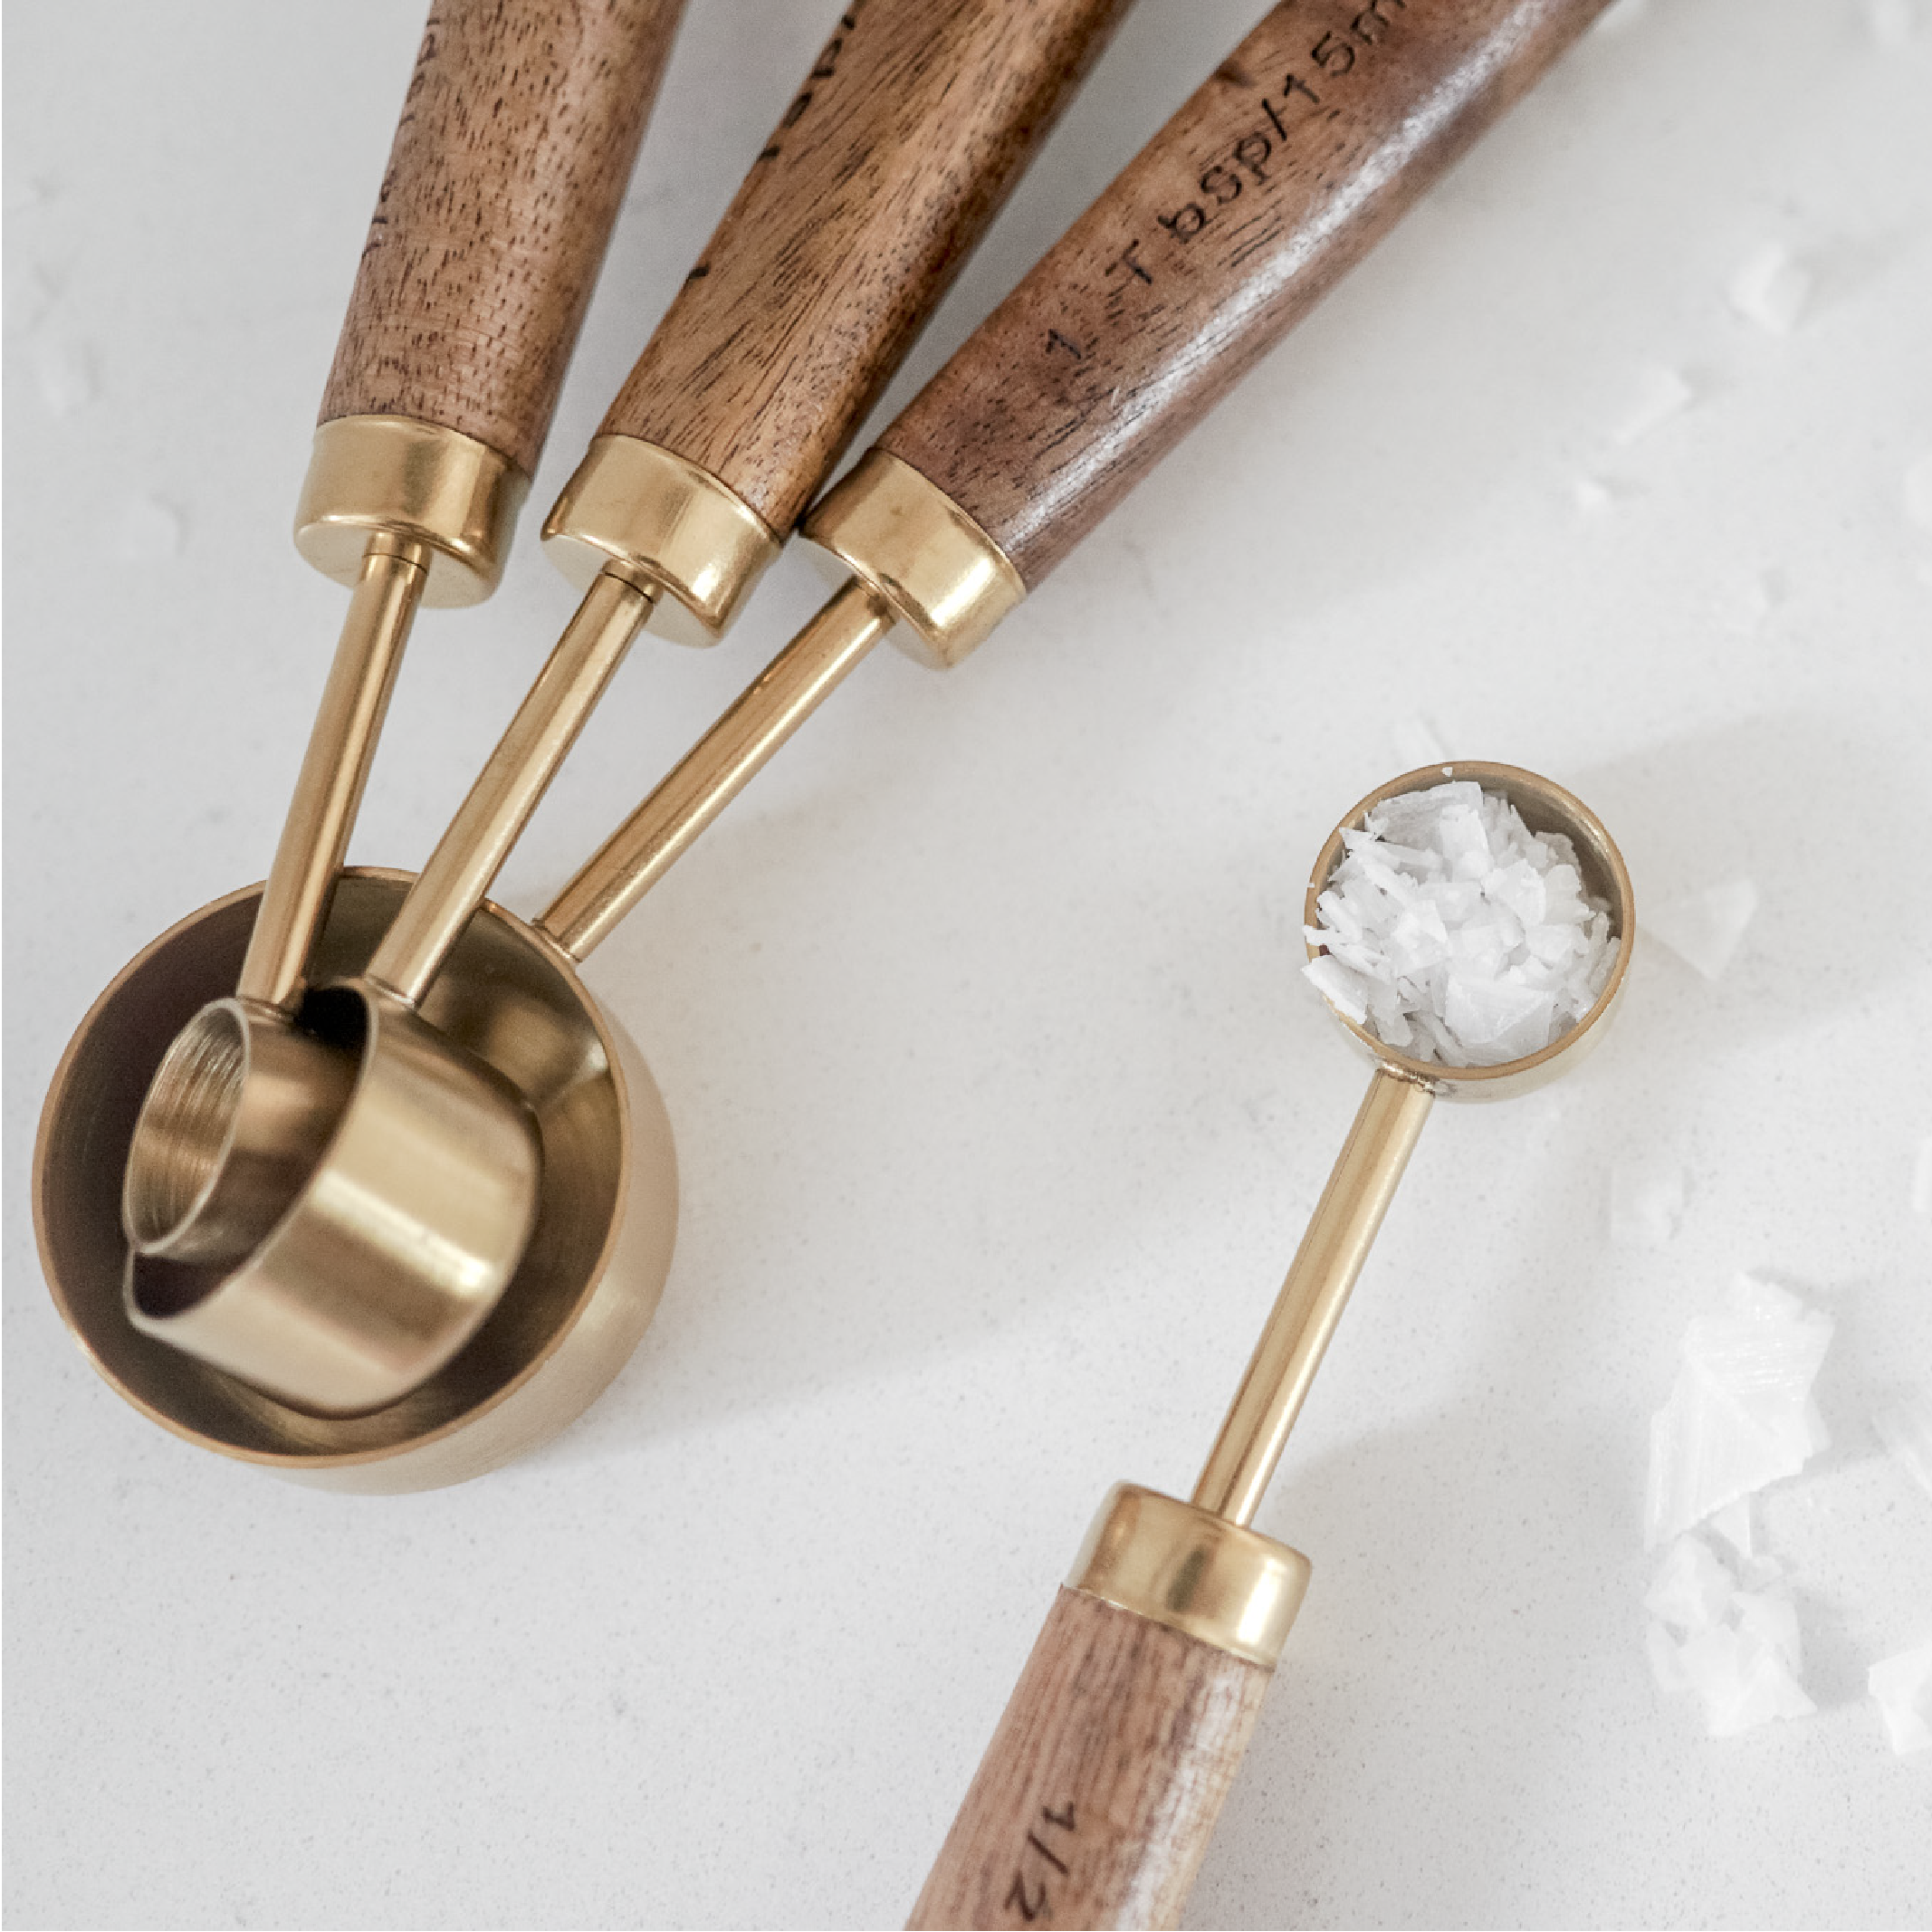 Gold Metal and Wood Nesting Measuring Spoons